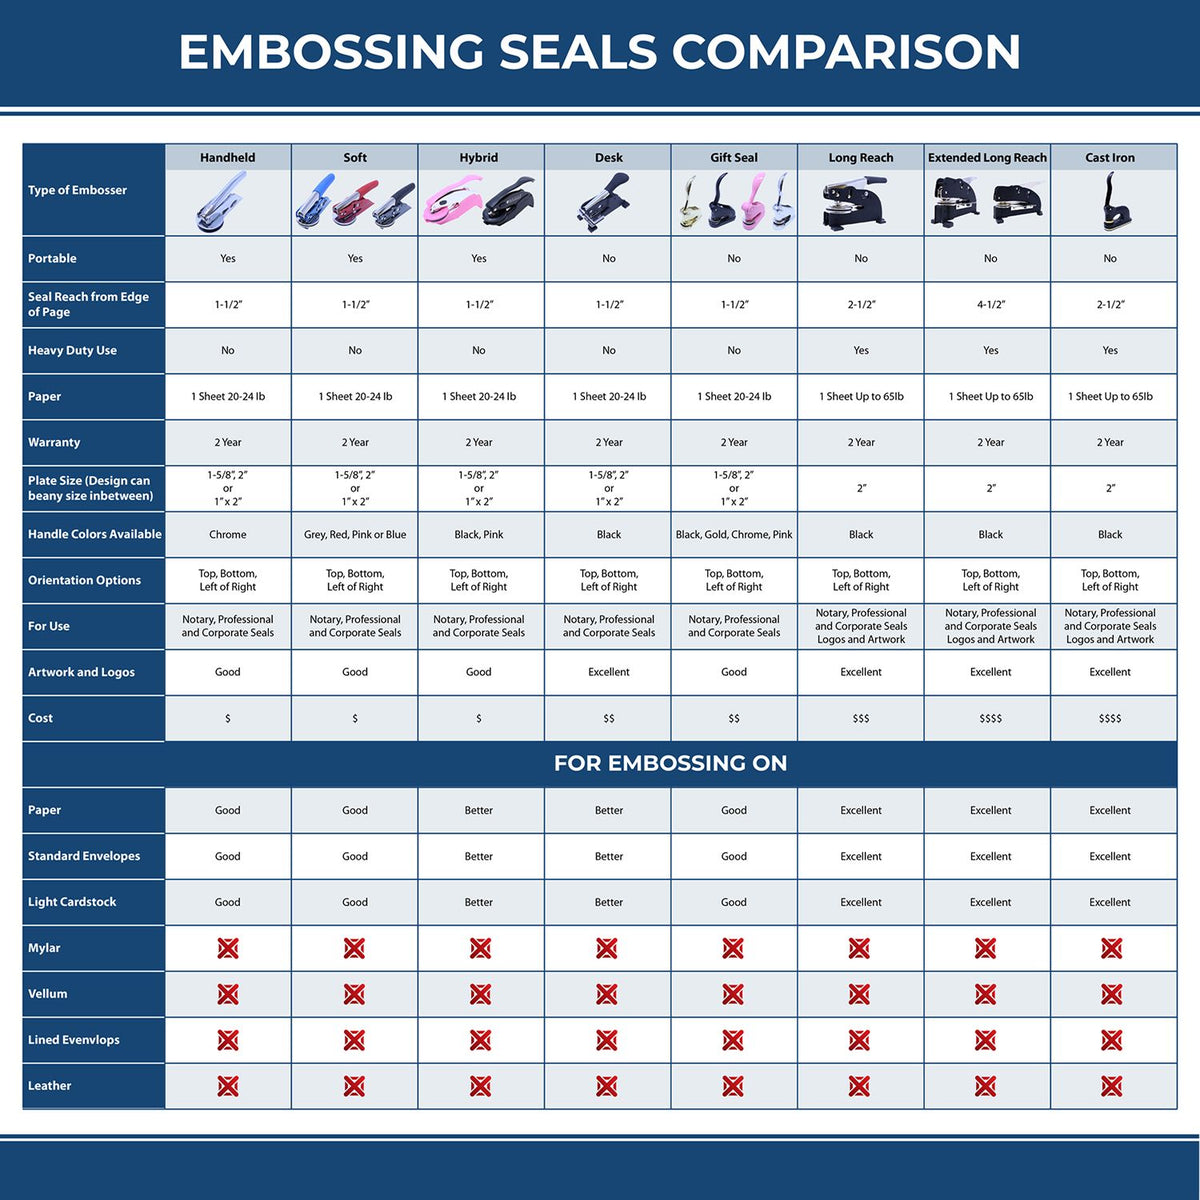 A comparison chart for the different types of mount models available for the Long Reach Vermont Geology Seal